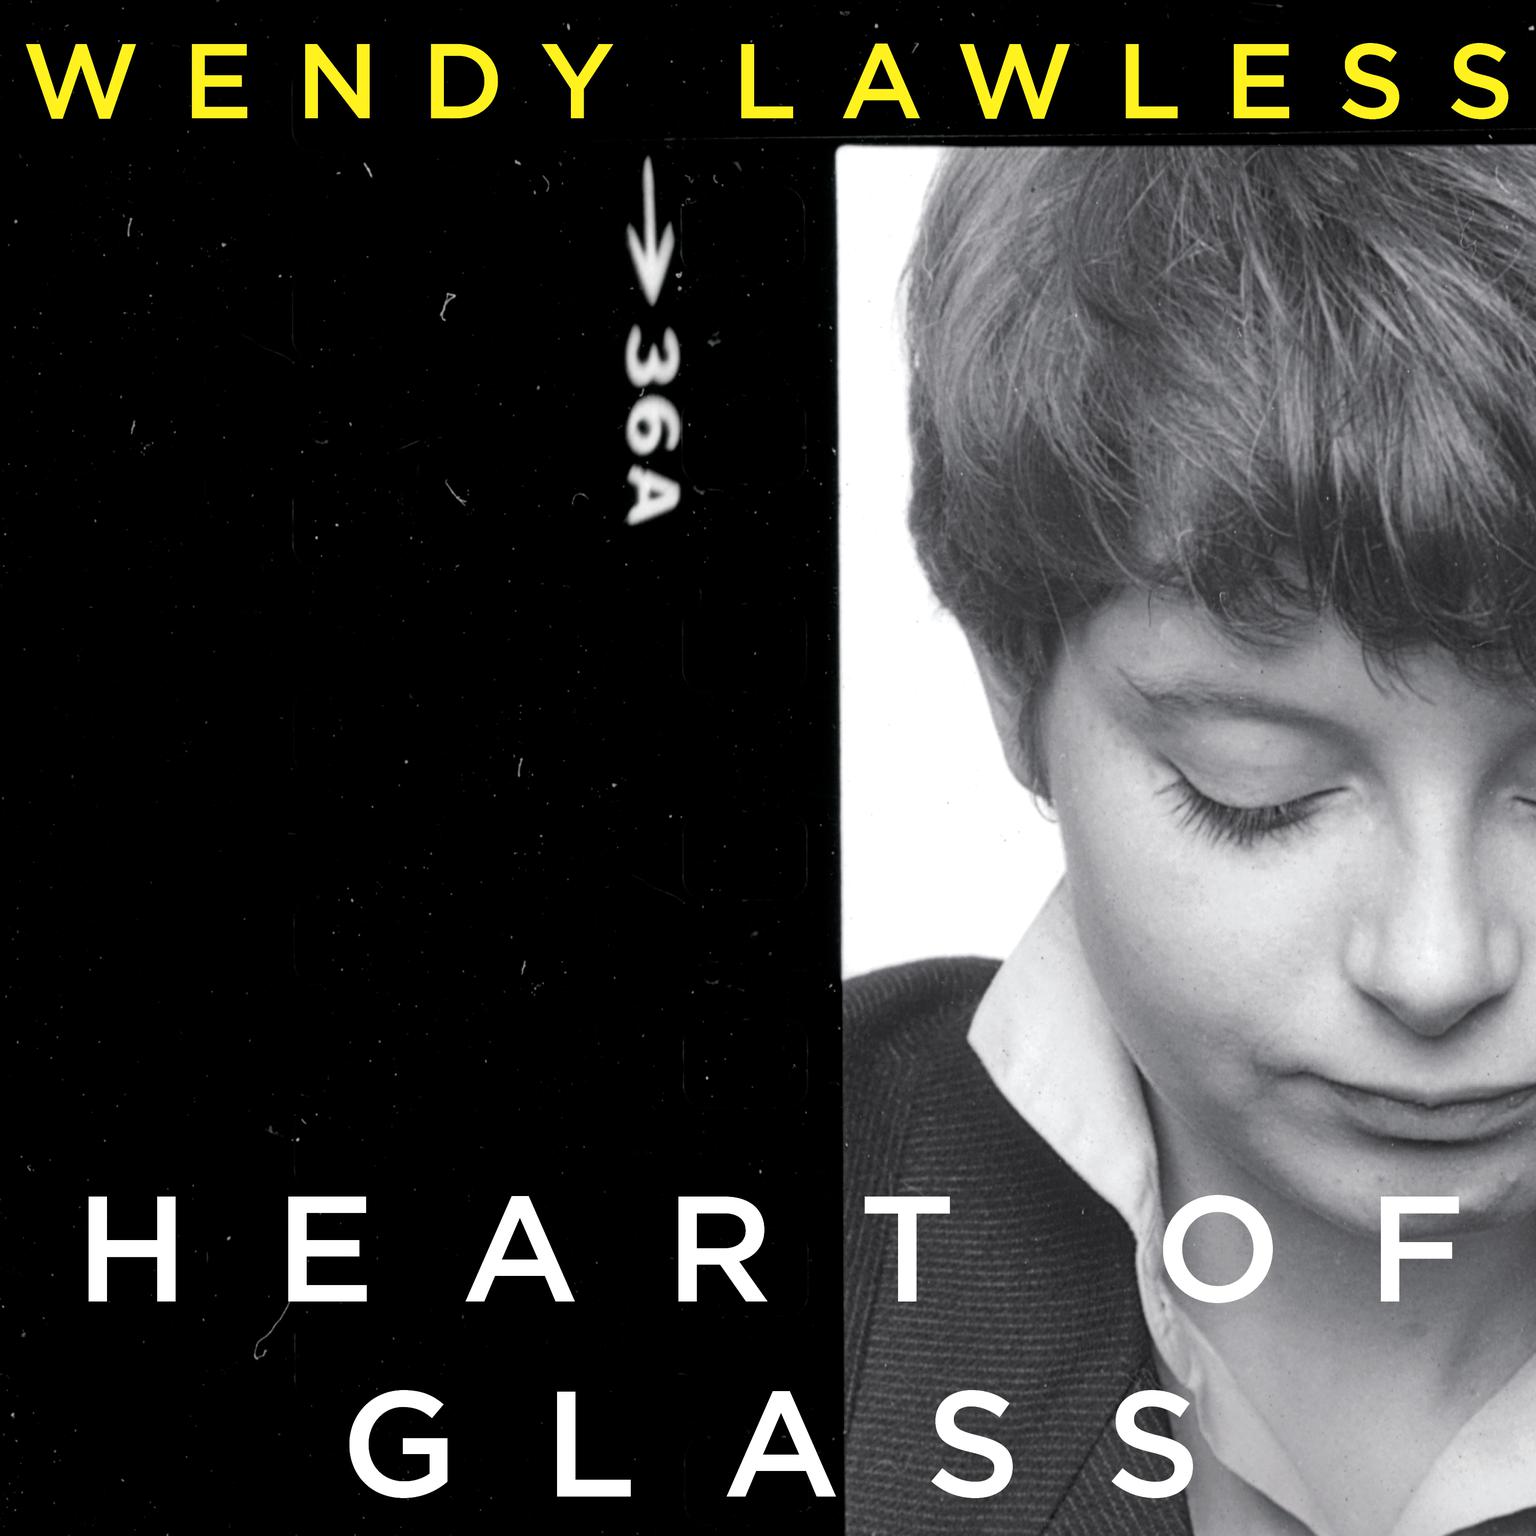 Heart of Glass Audiobook, by Wendy Lawless